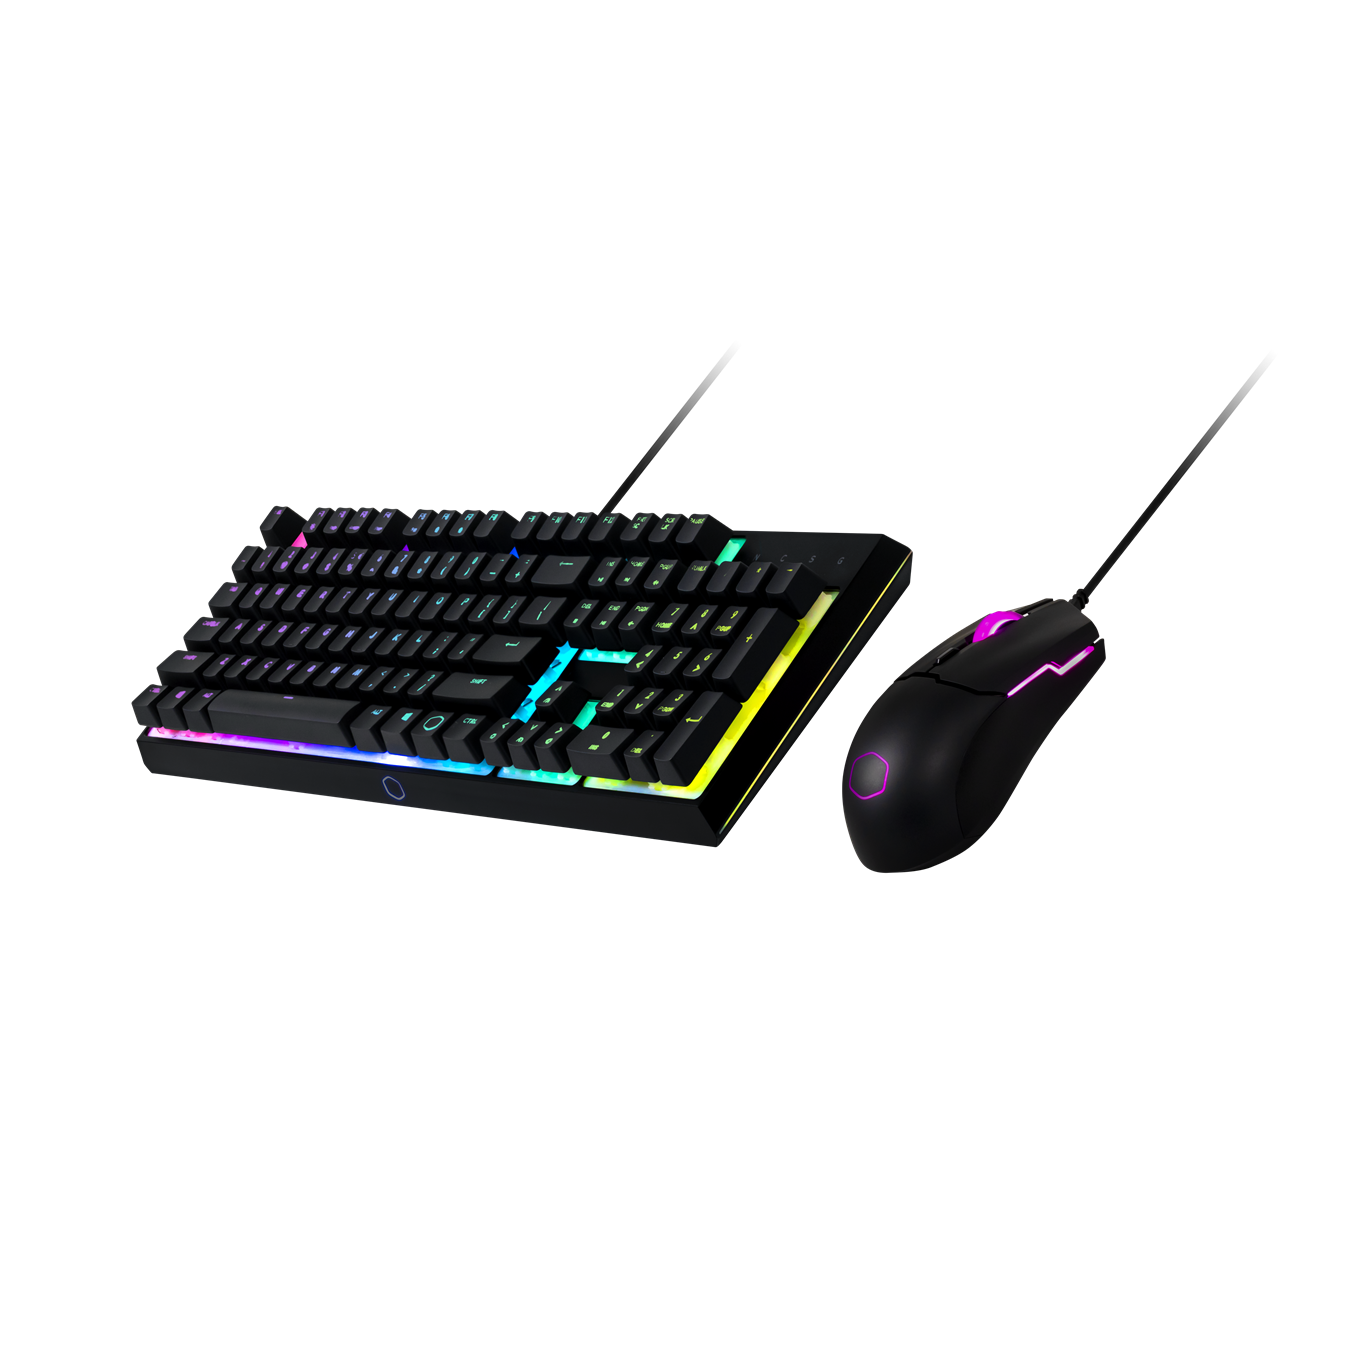 MS110 RGB Mechanical Gaming Keyboard - RGB lighting, windows lock and multimedia controls via function key makes customization simple without the need for bloated software